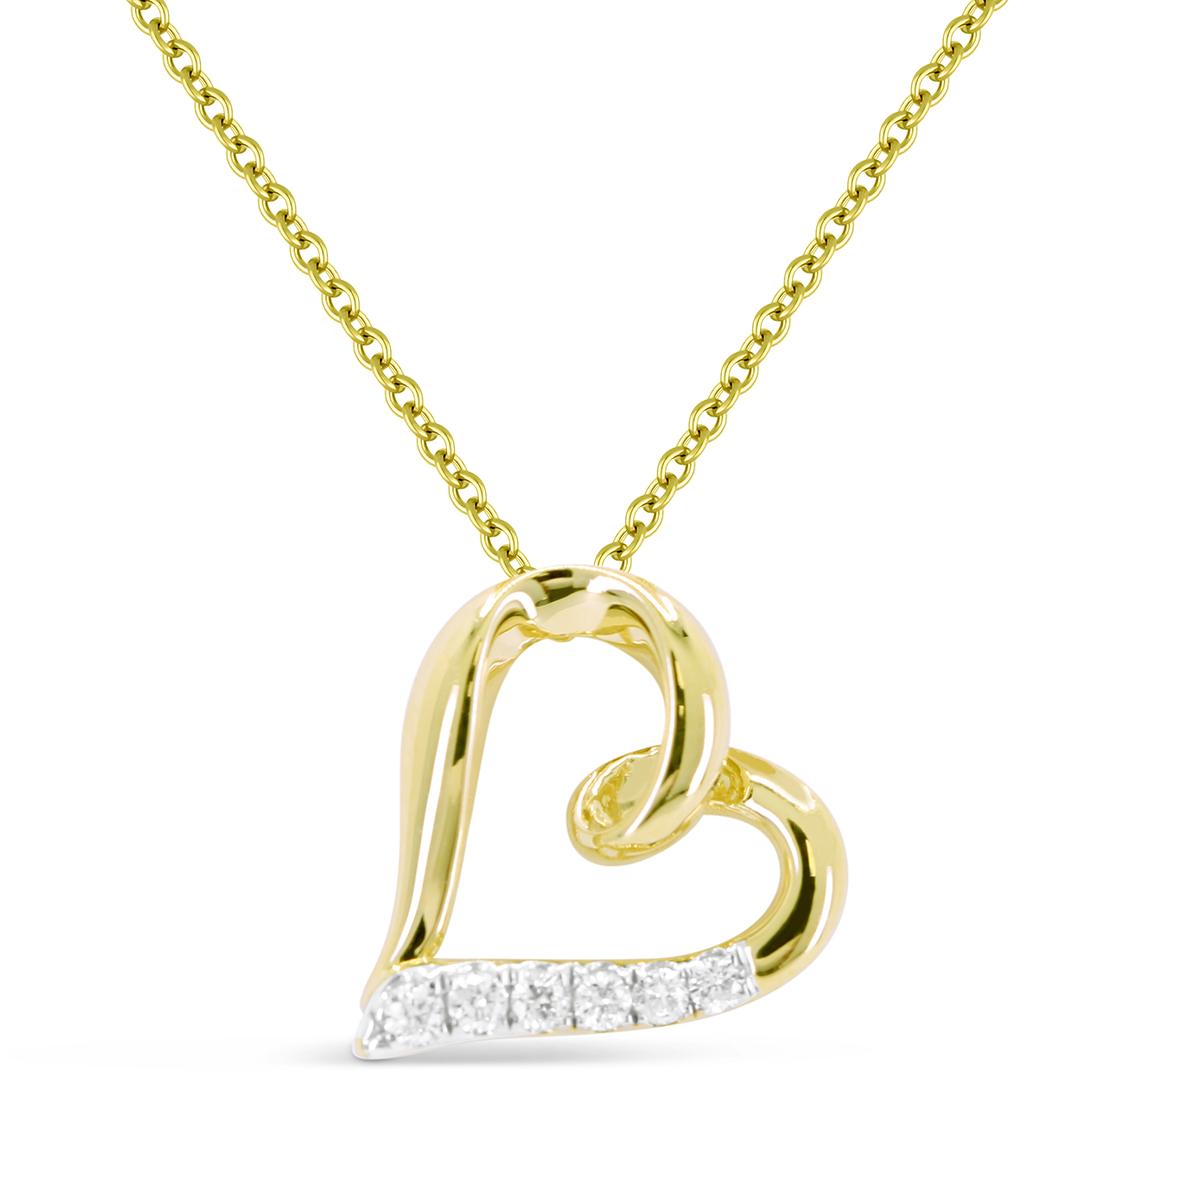 9ct Gold Heart Locket (Chain Included) at Fraser Hart